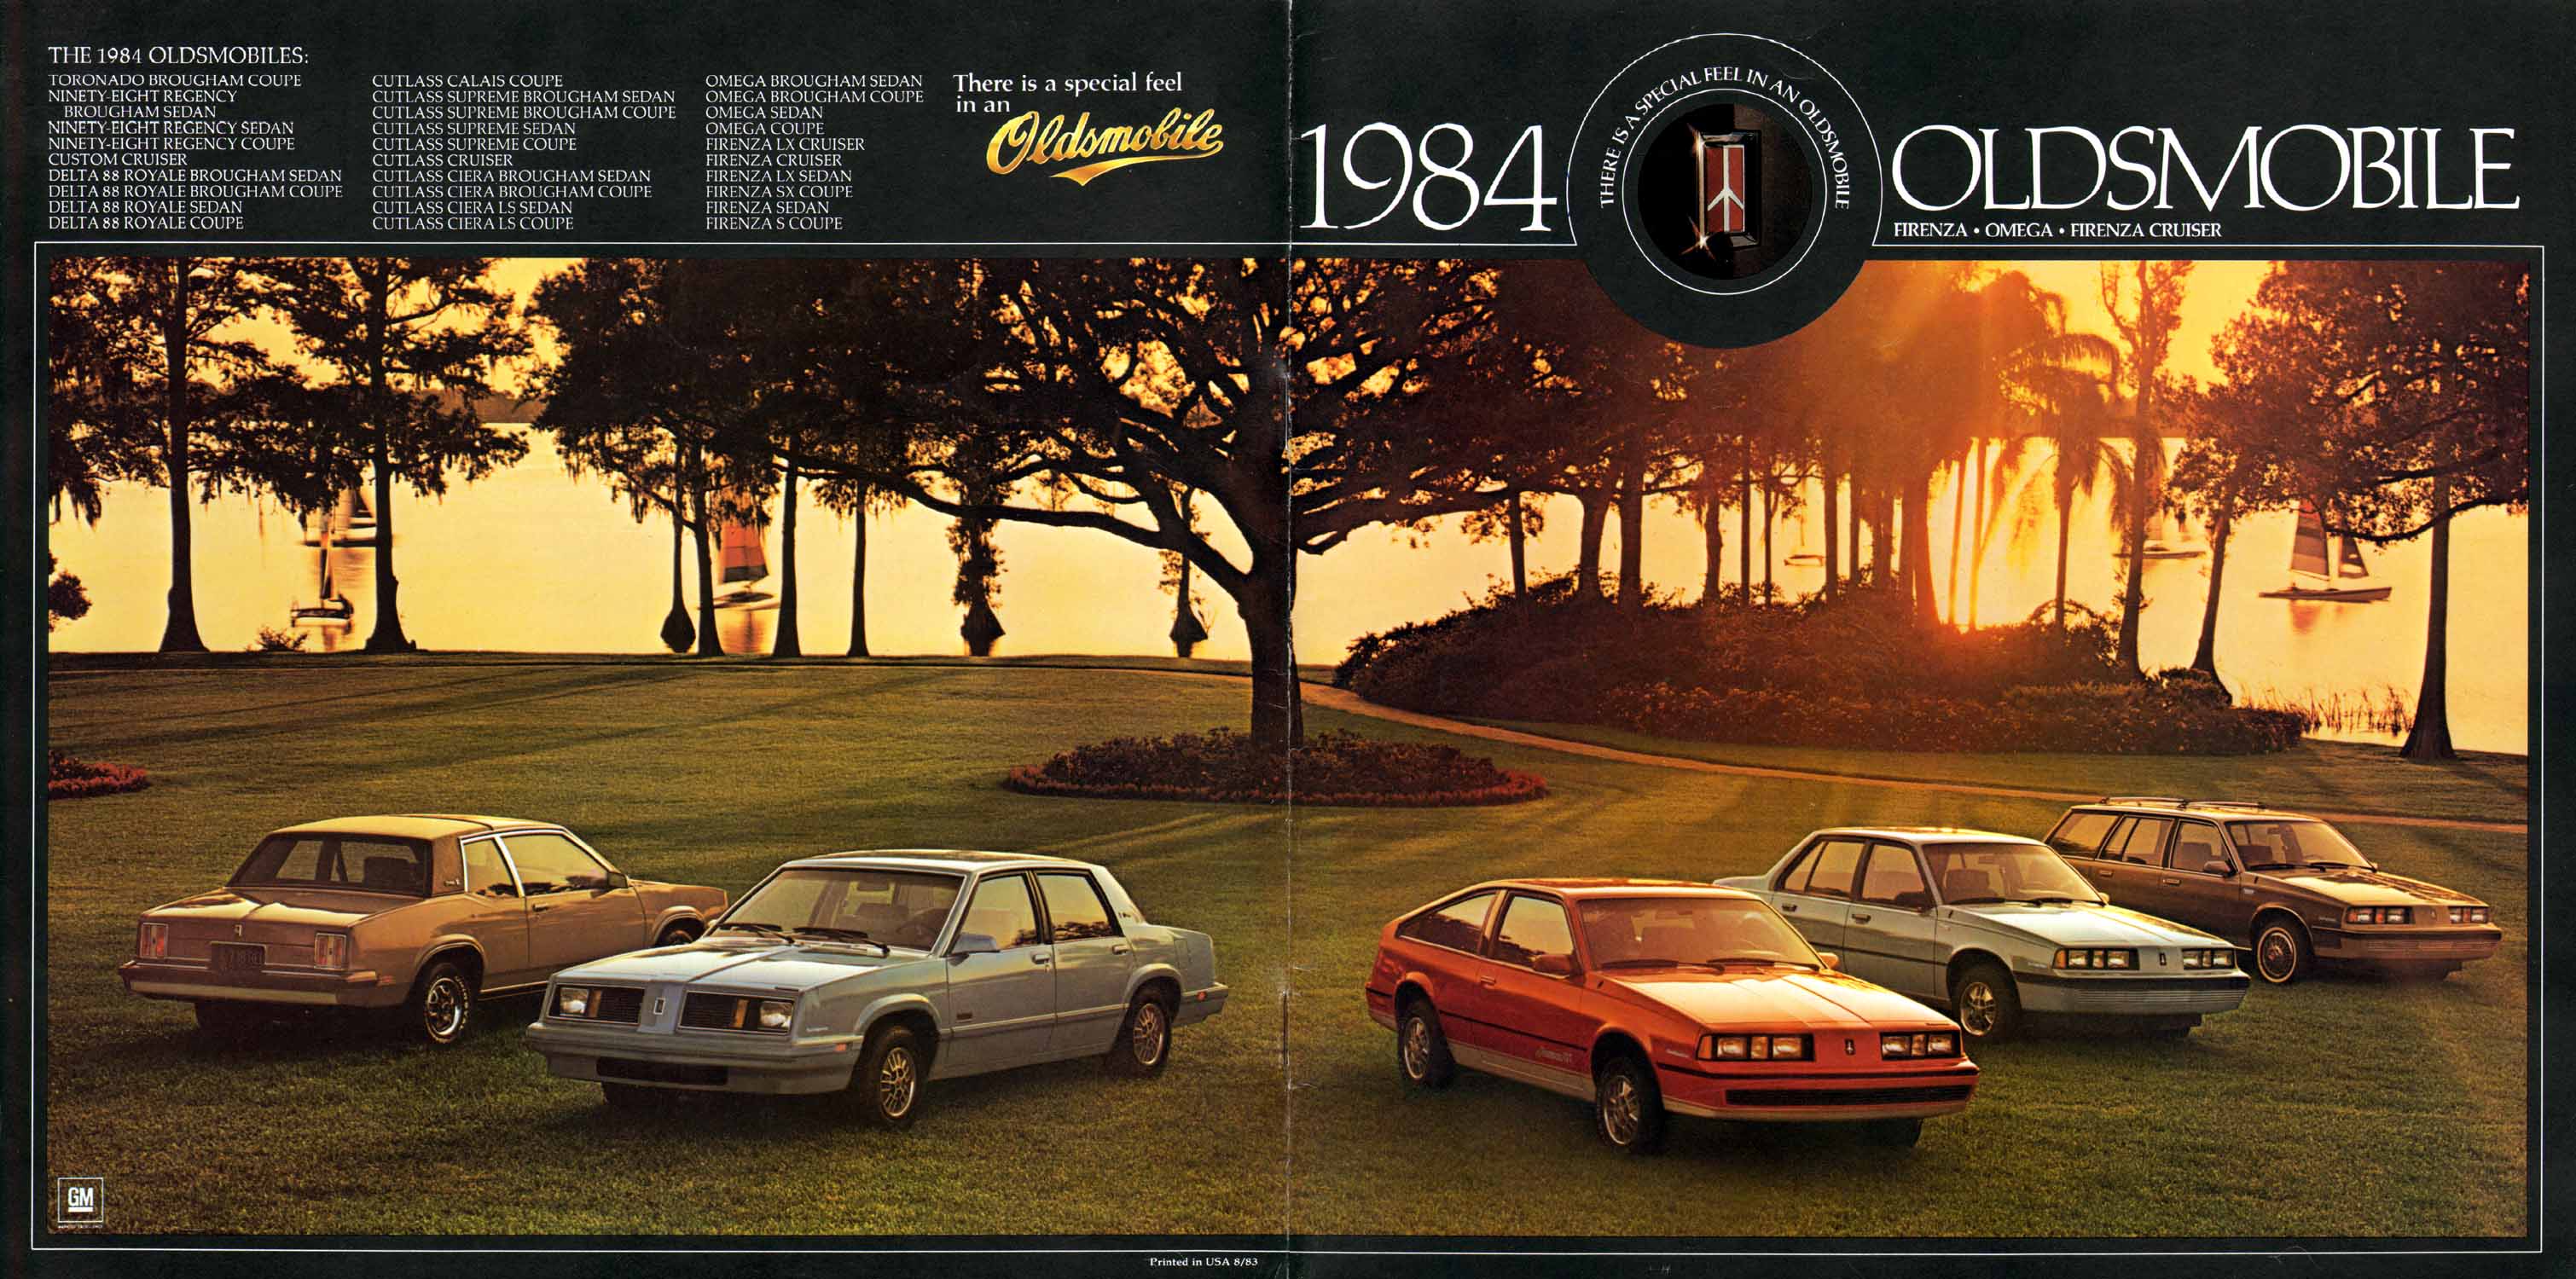 1984_Oldsmobile_Small_Size-29-30